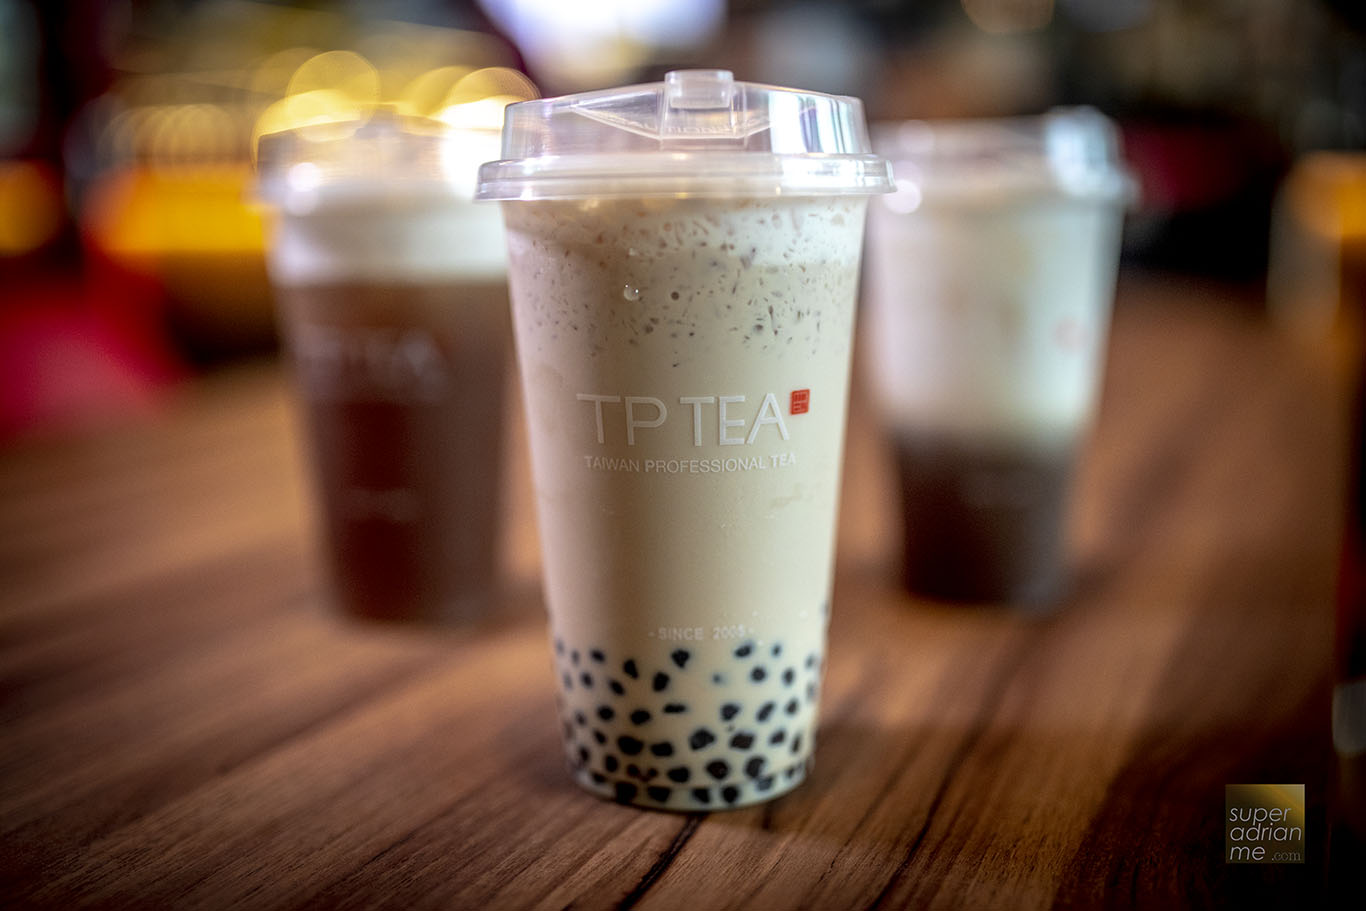 TP TEA opens first outlet at Changi Airport T2 on 27 June 2018